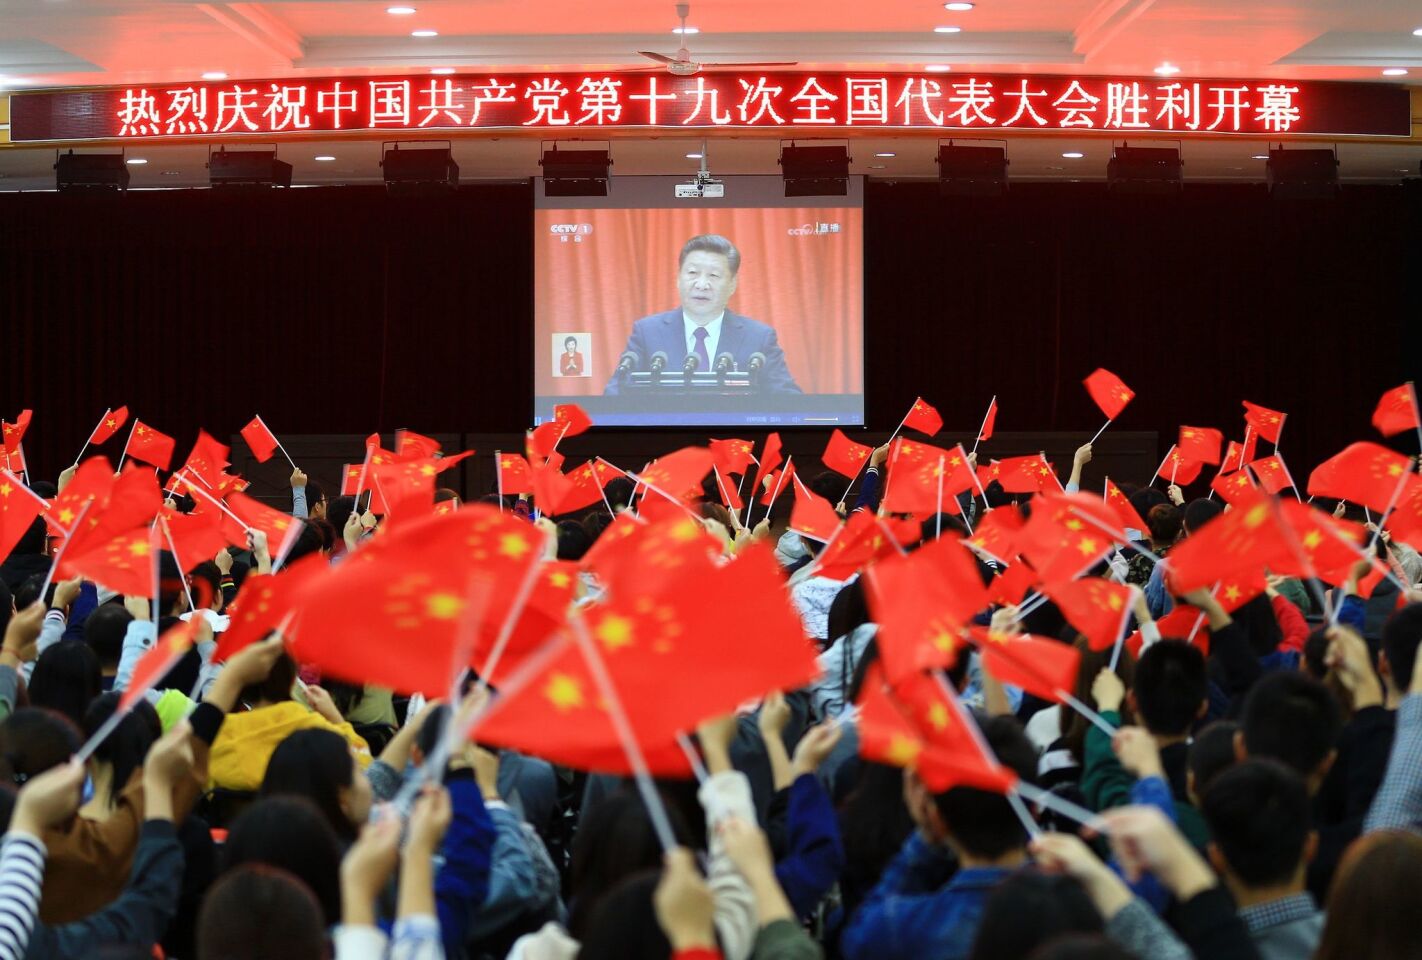 19th Communist Party Congress in China